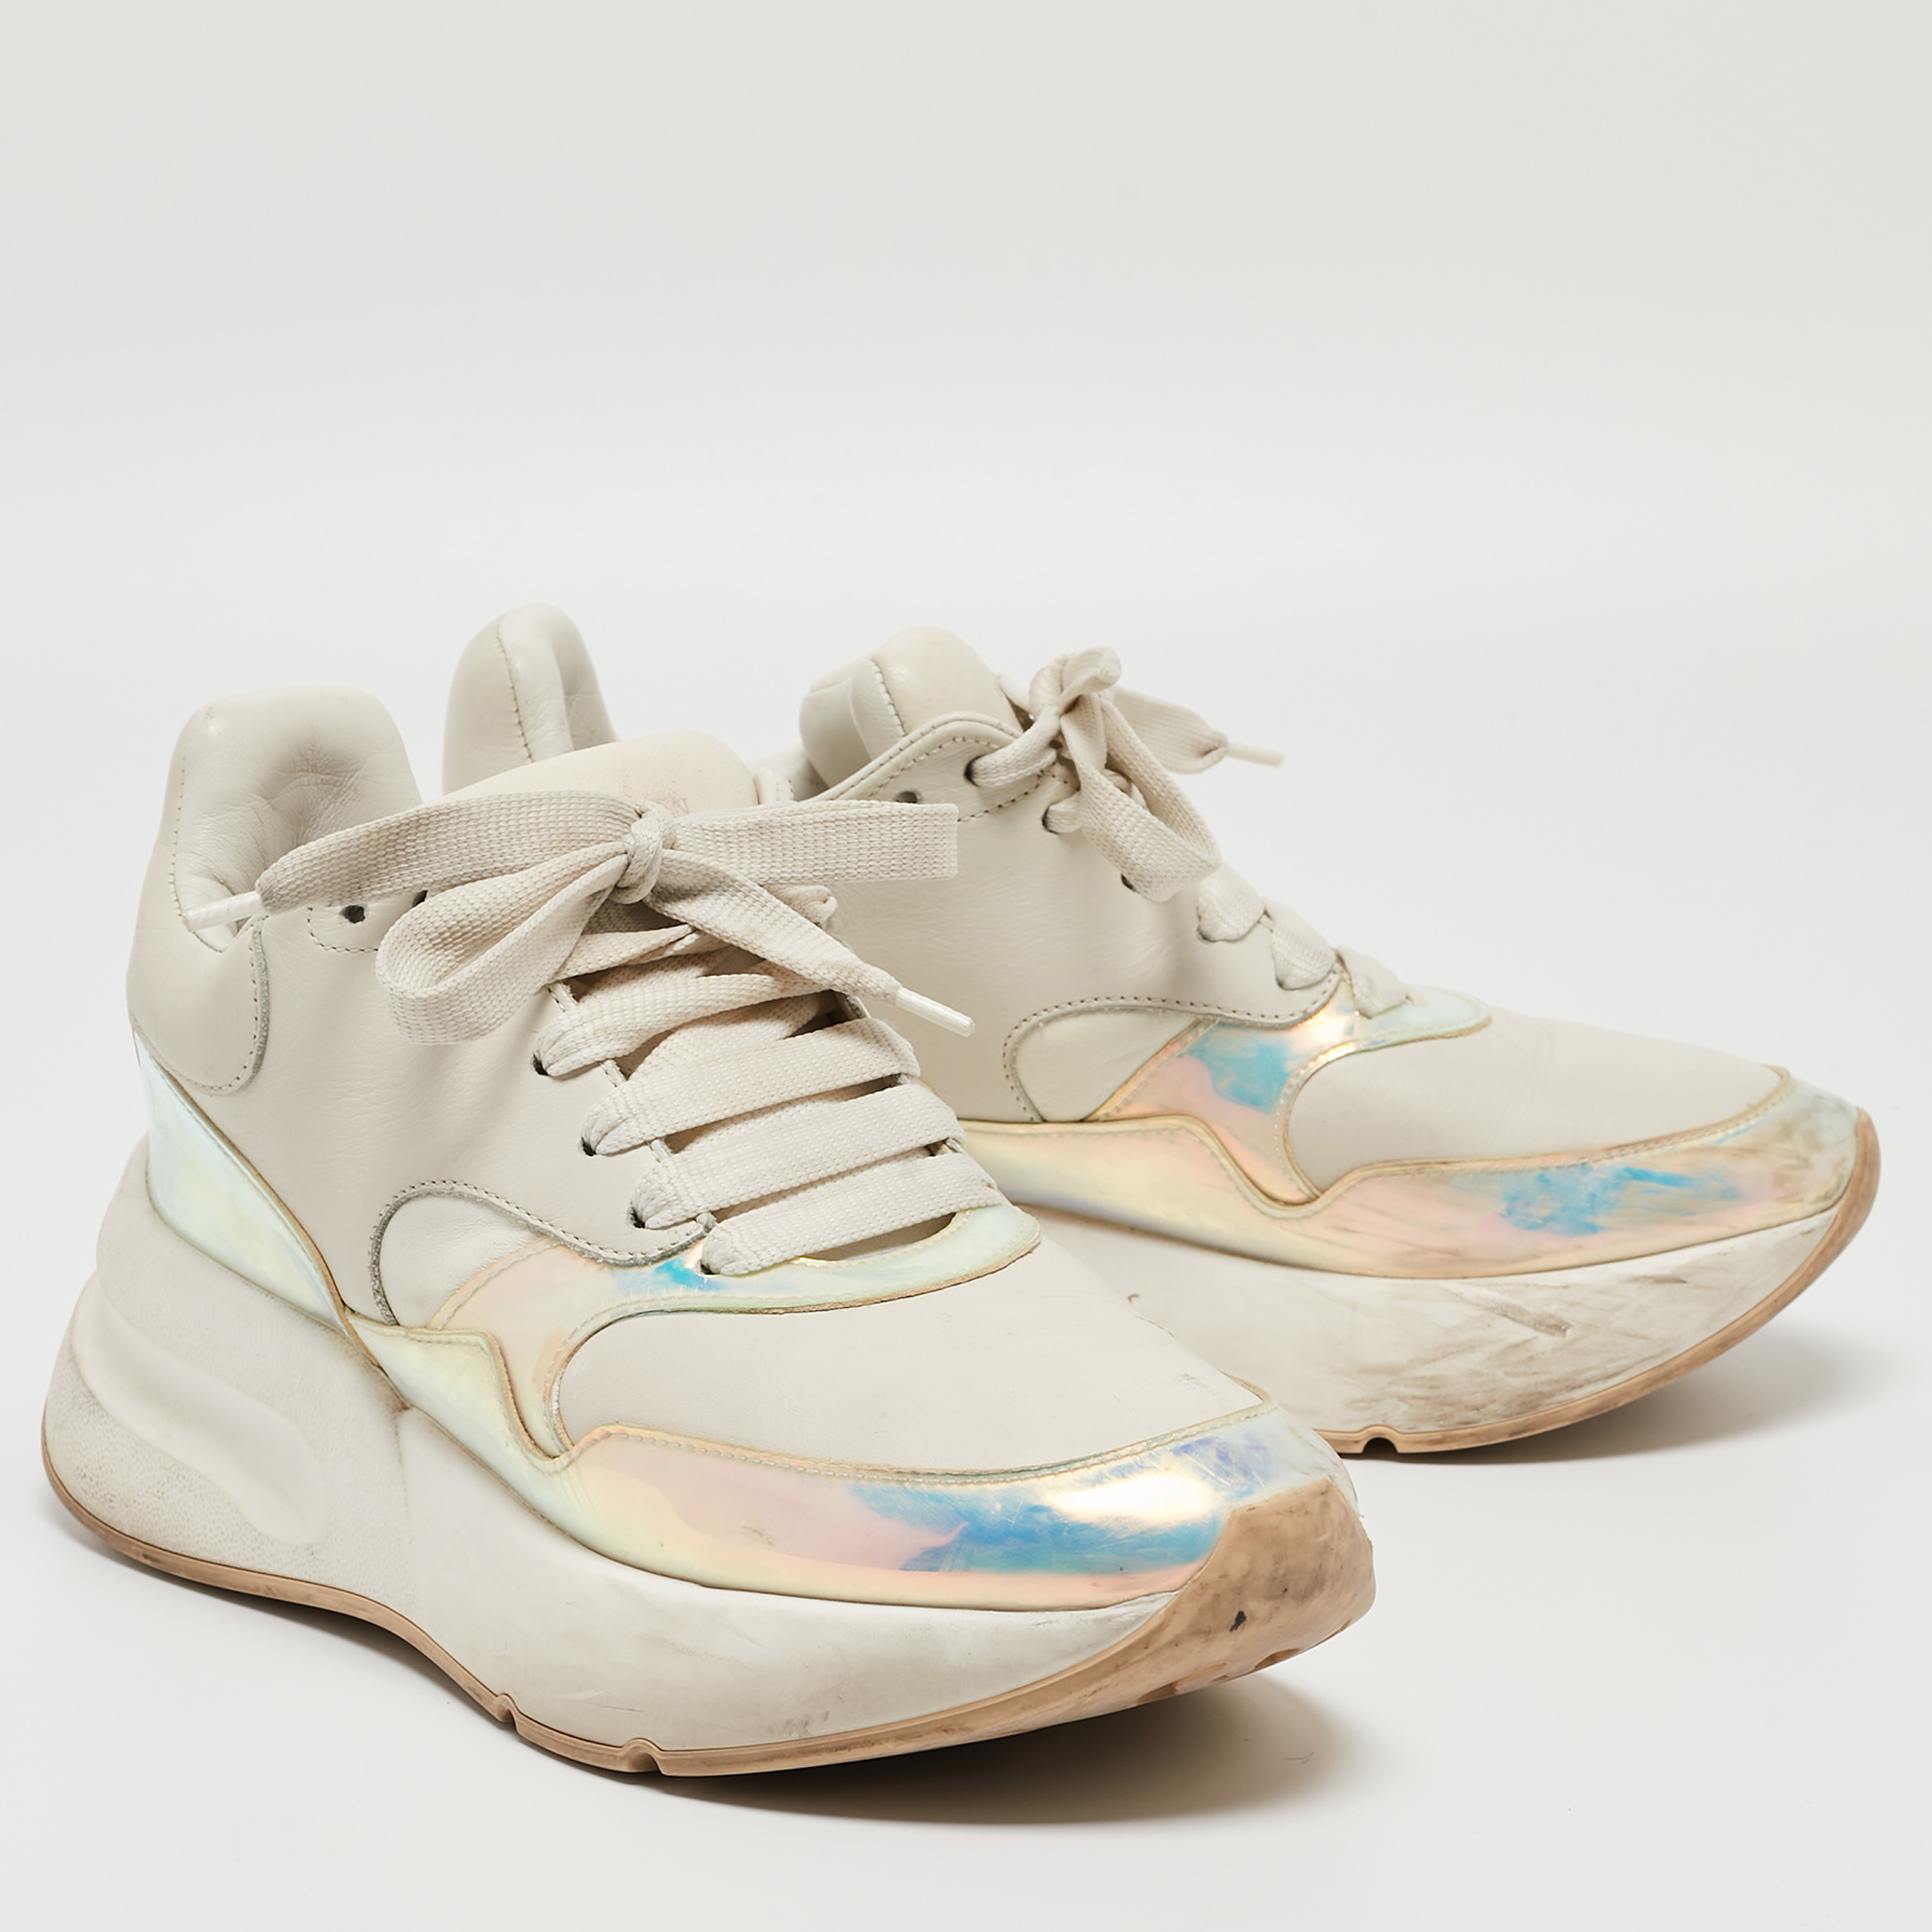 Alexander McQueen White/Holographic Leather Oversized Runner Sneakers Size 39.5